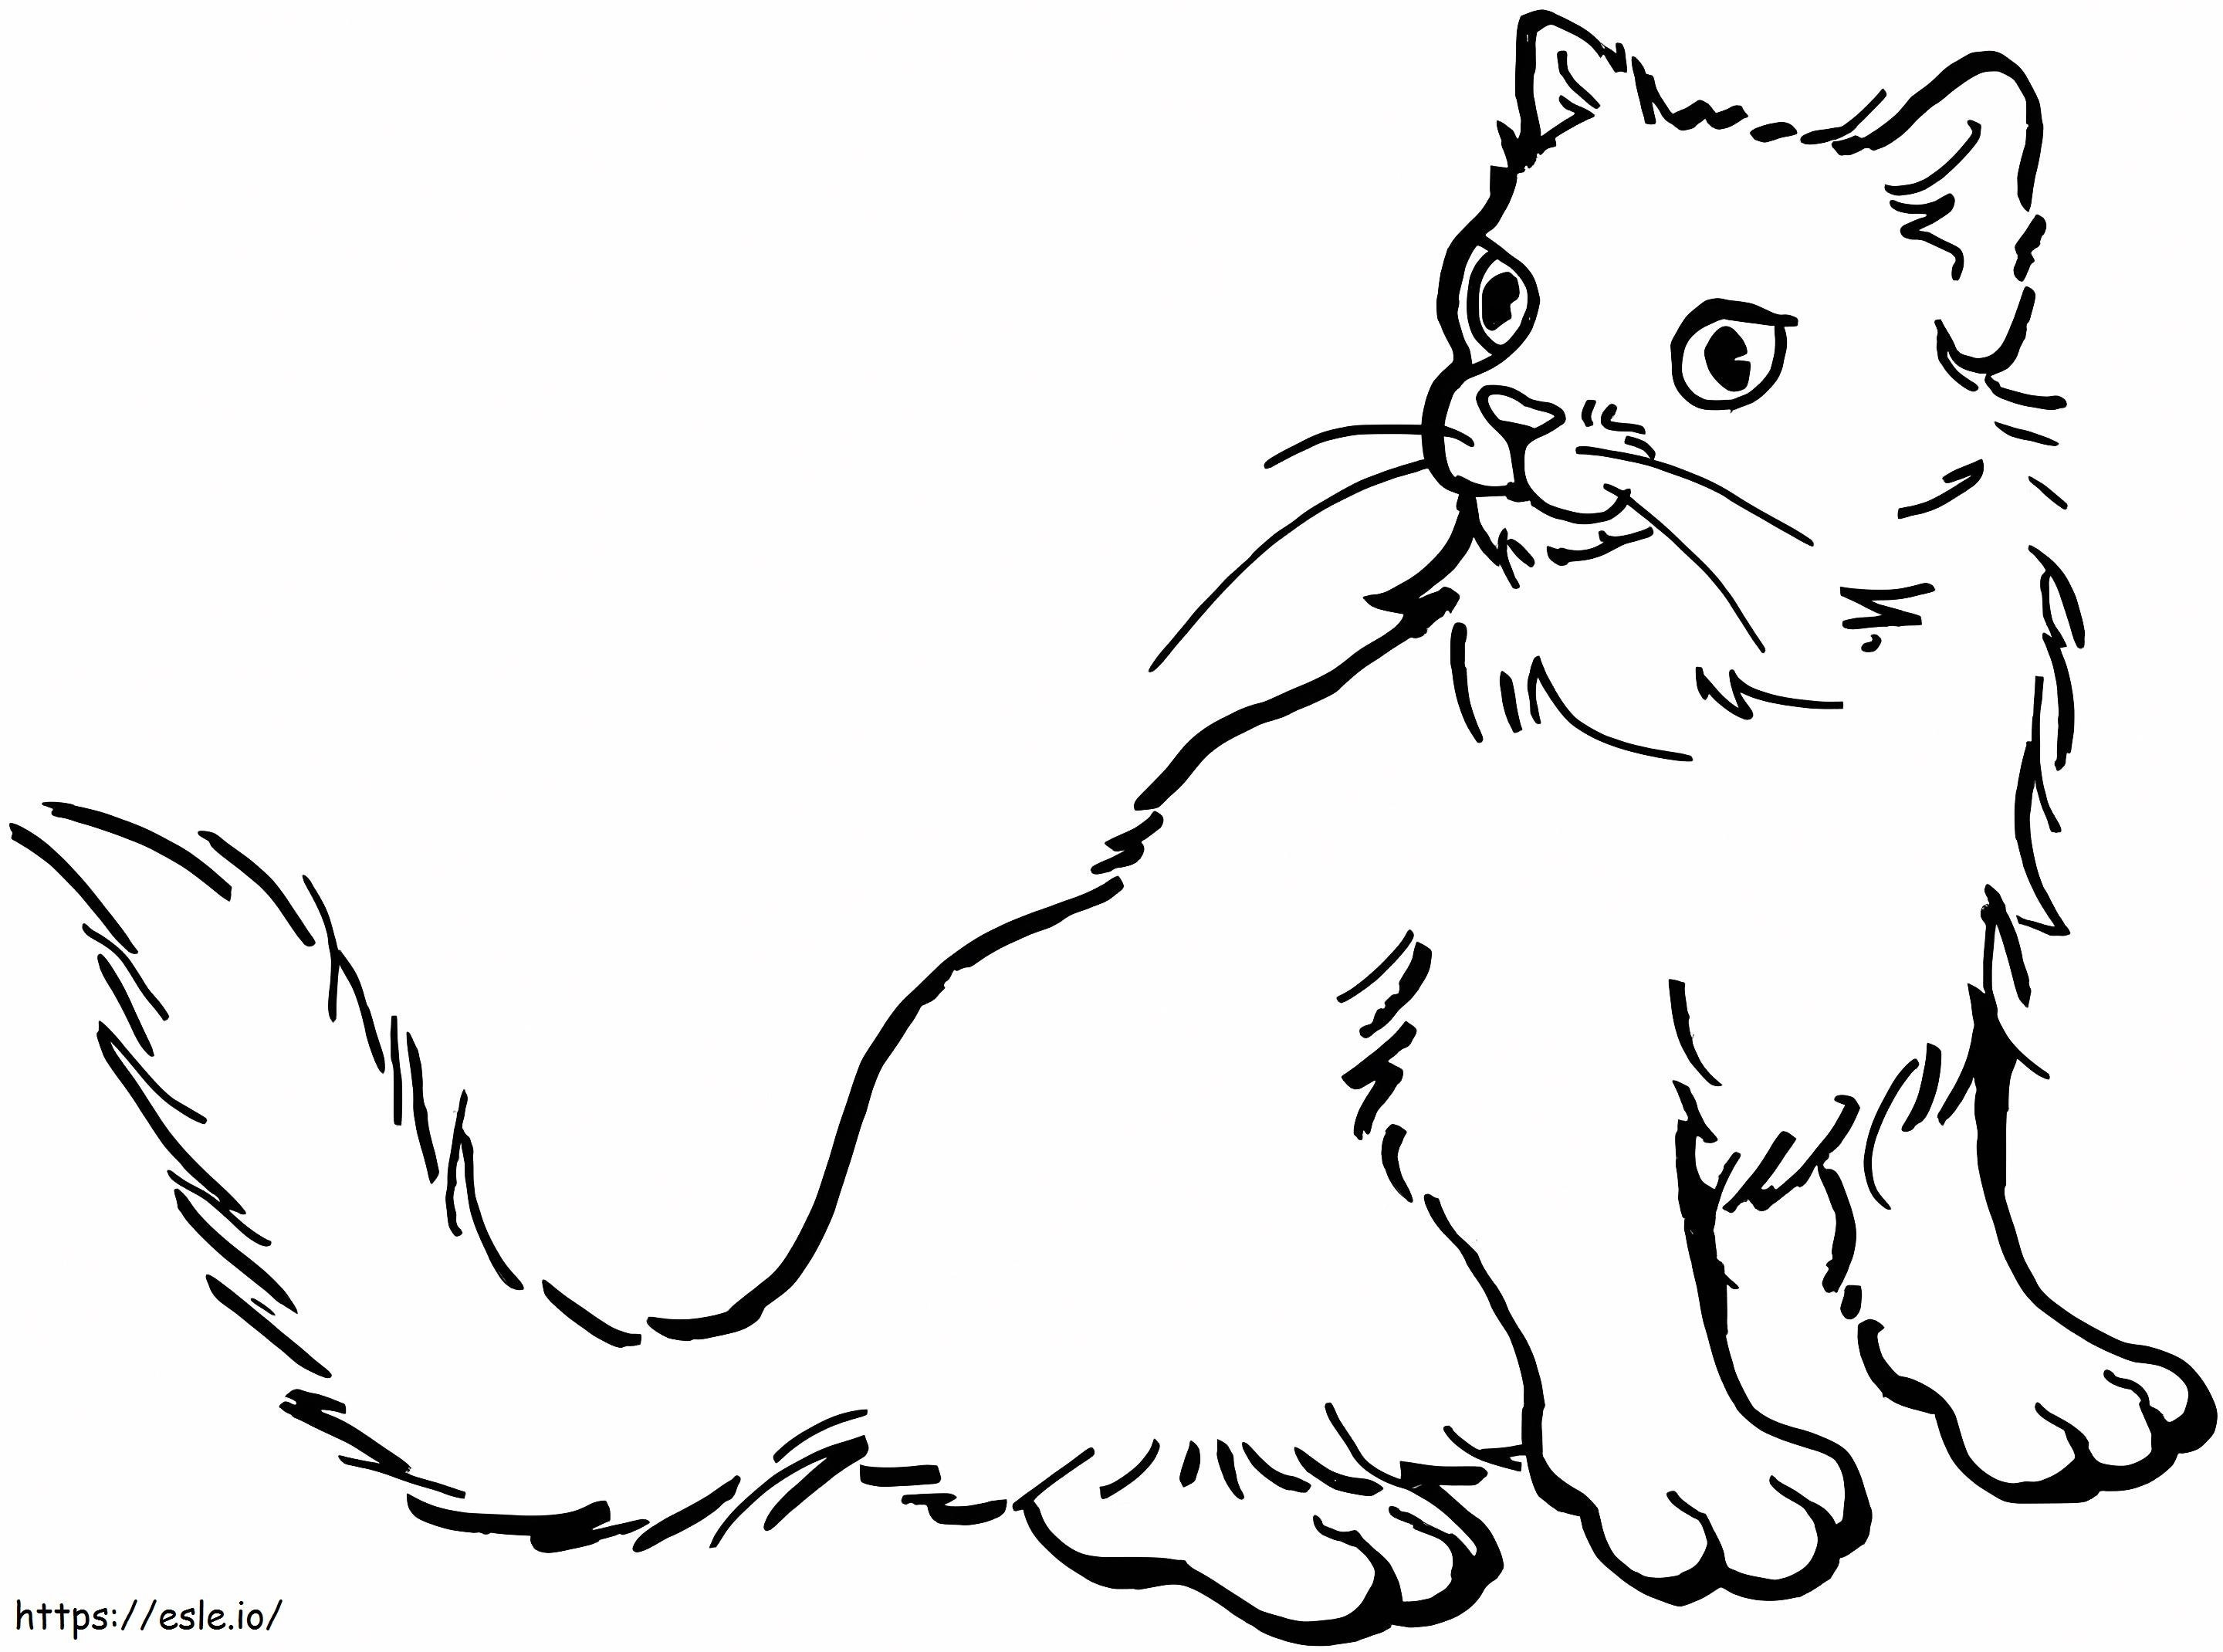 A Normal Cat coloring page